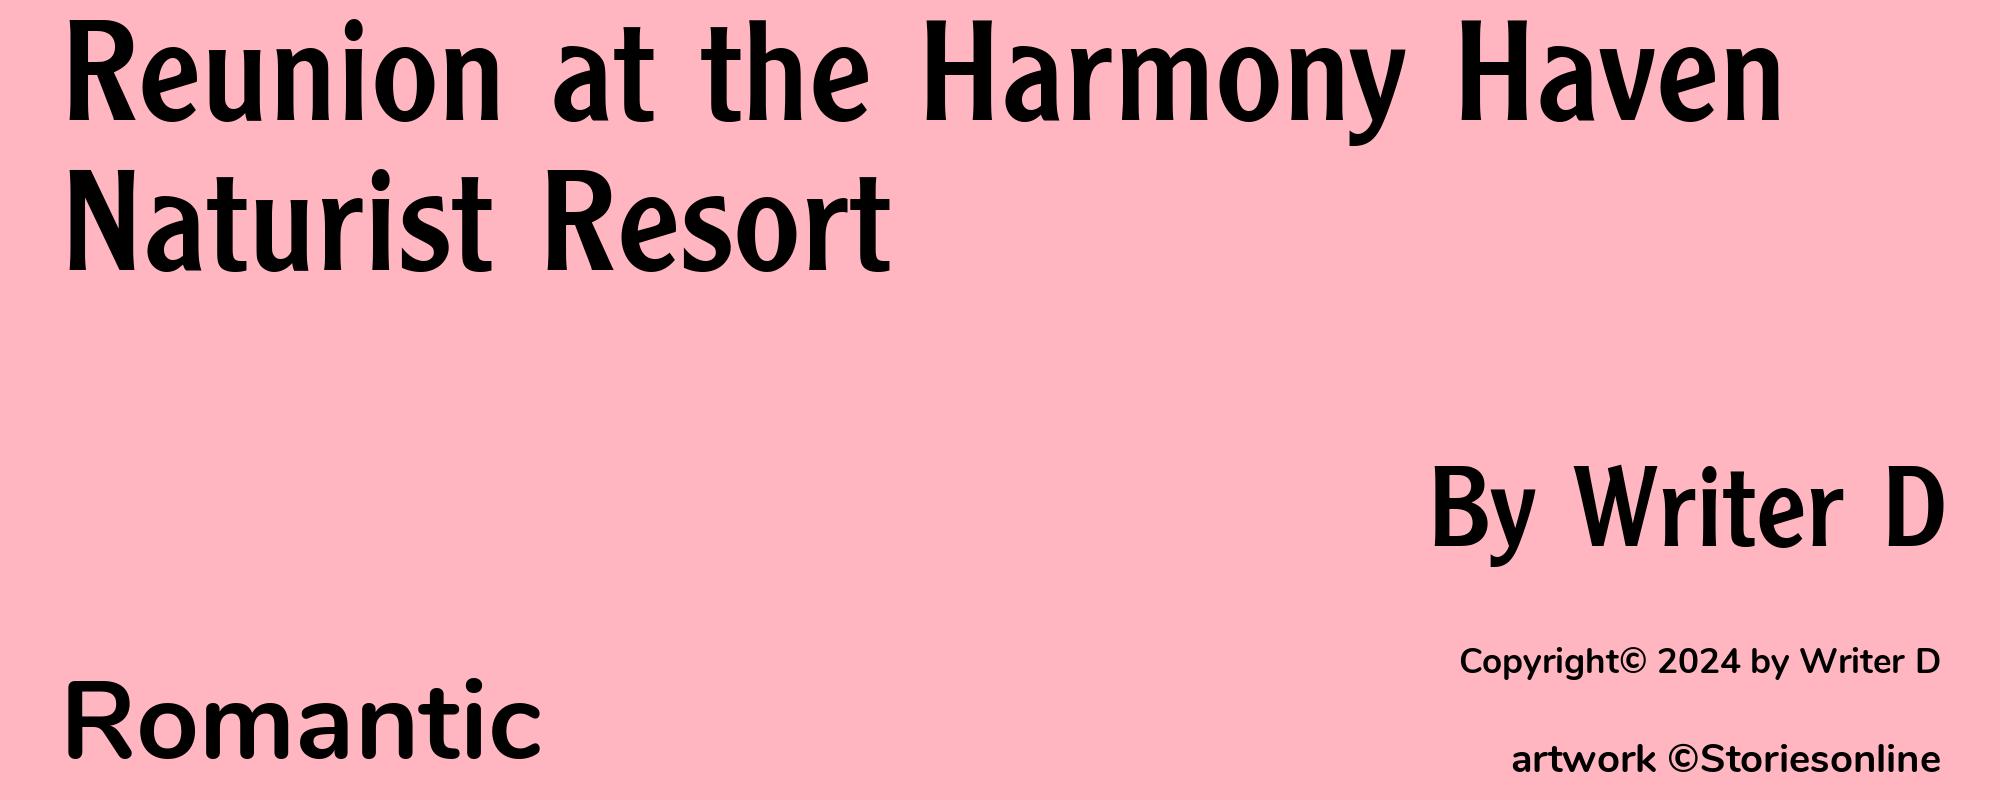 Reunion at the Harmony Haven Naturist Resort - Cover